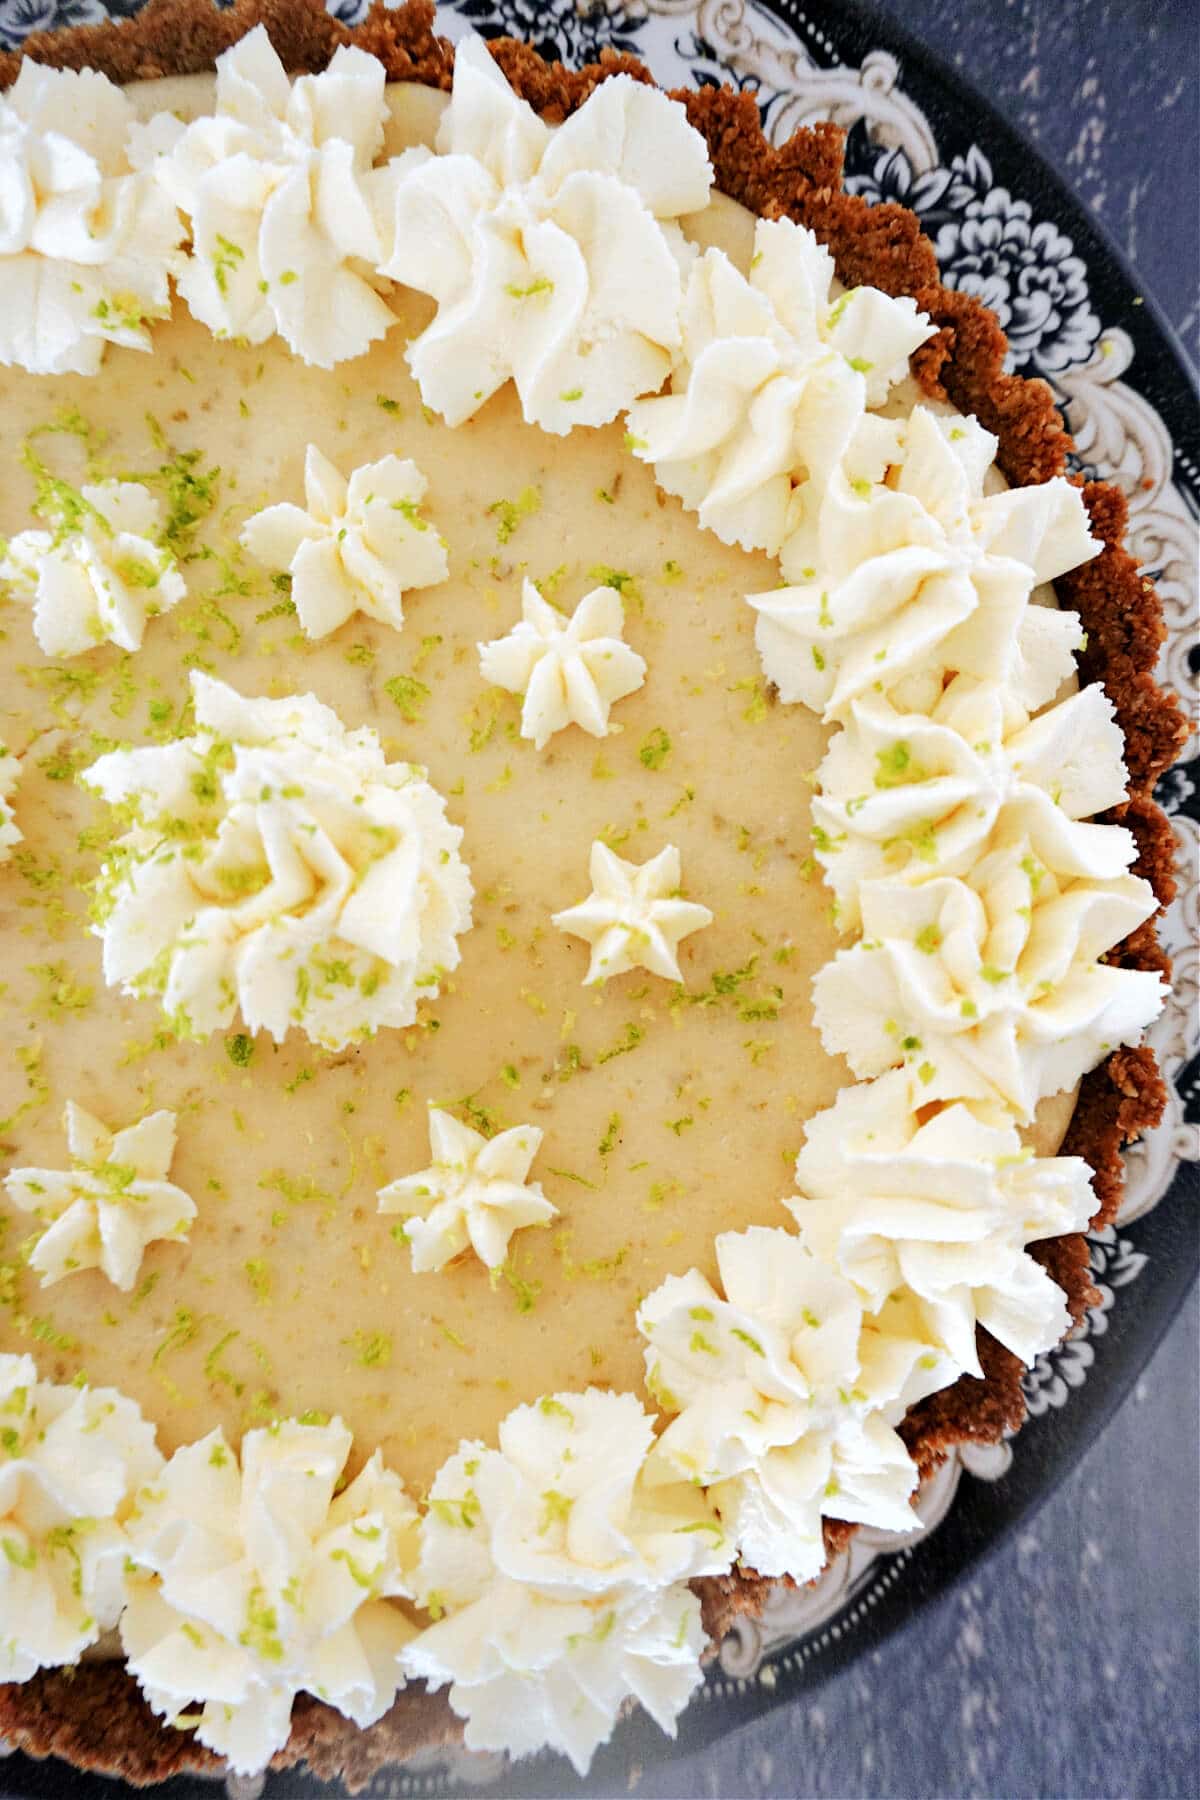 Close-up shot of half of a key lime pie.